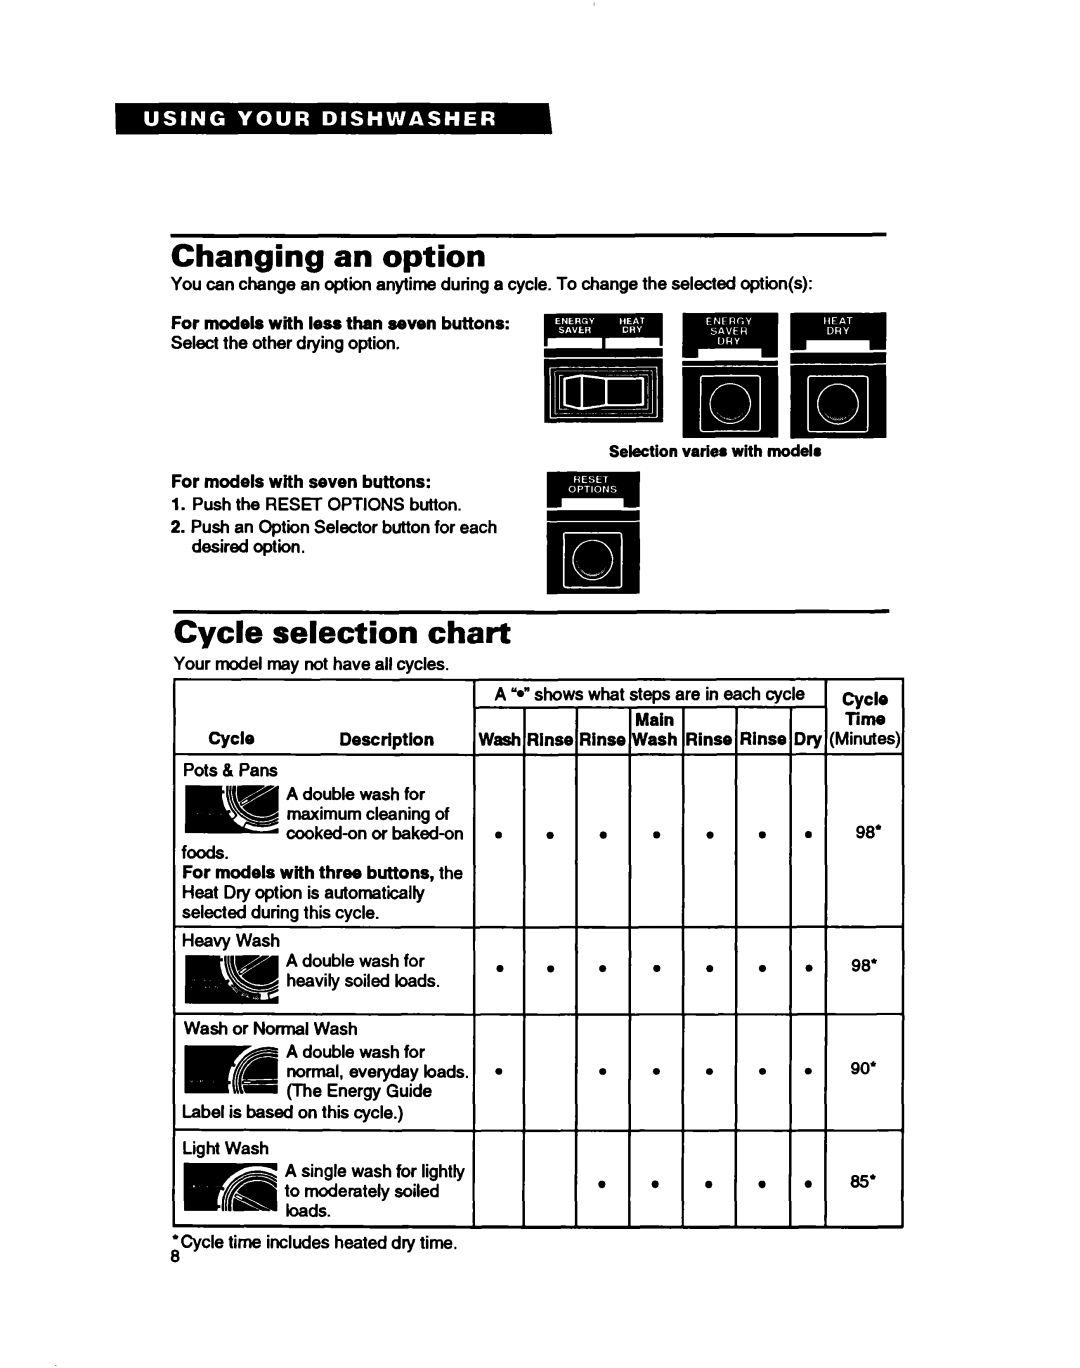 Whirlpool WU3000 Changing an option, Cycle selection chart, Selection varie8 with model, For models with seven buttons 